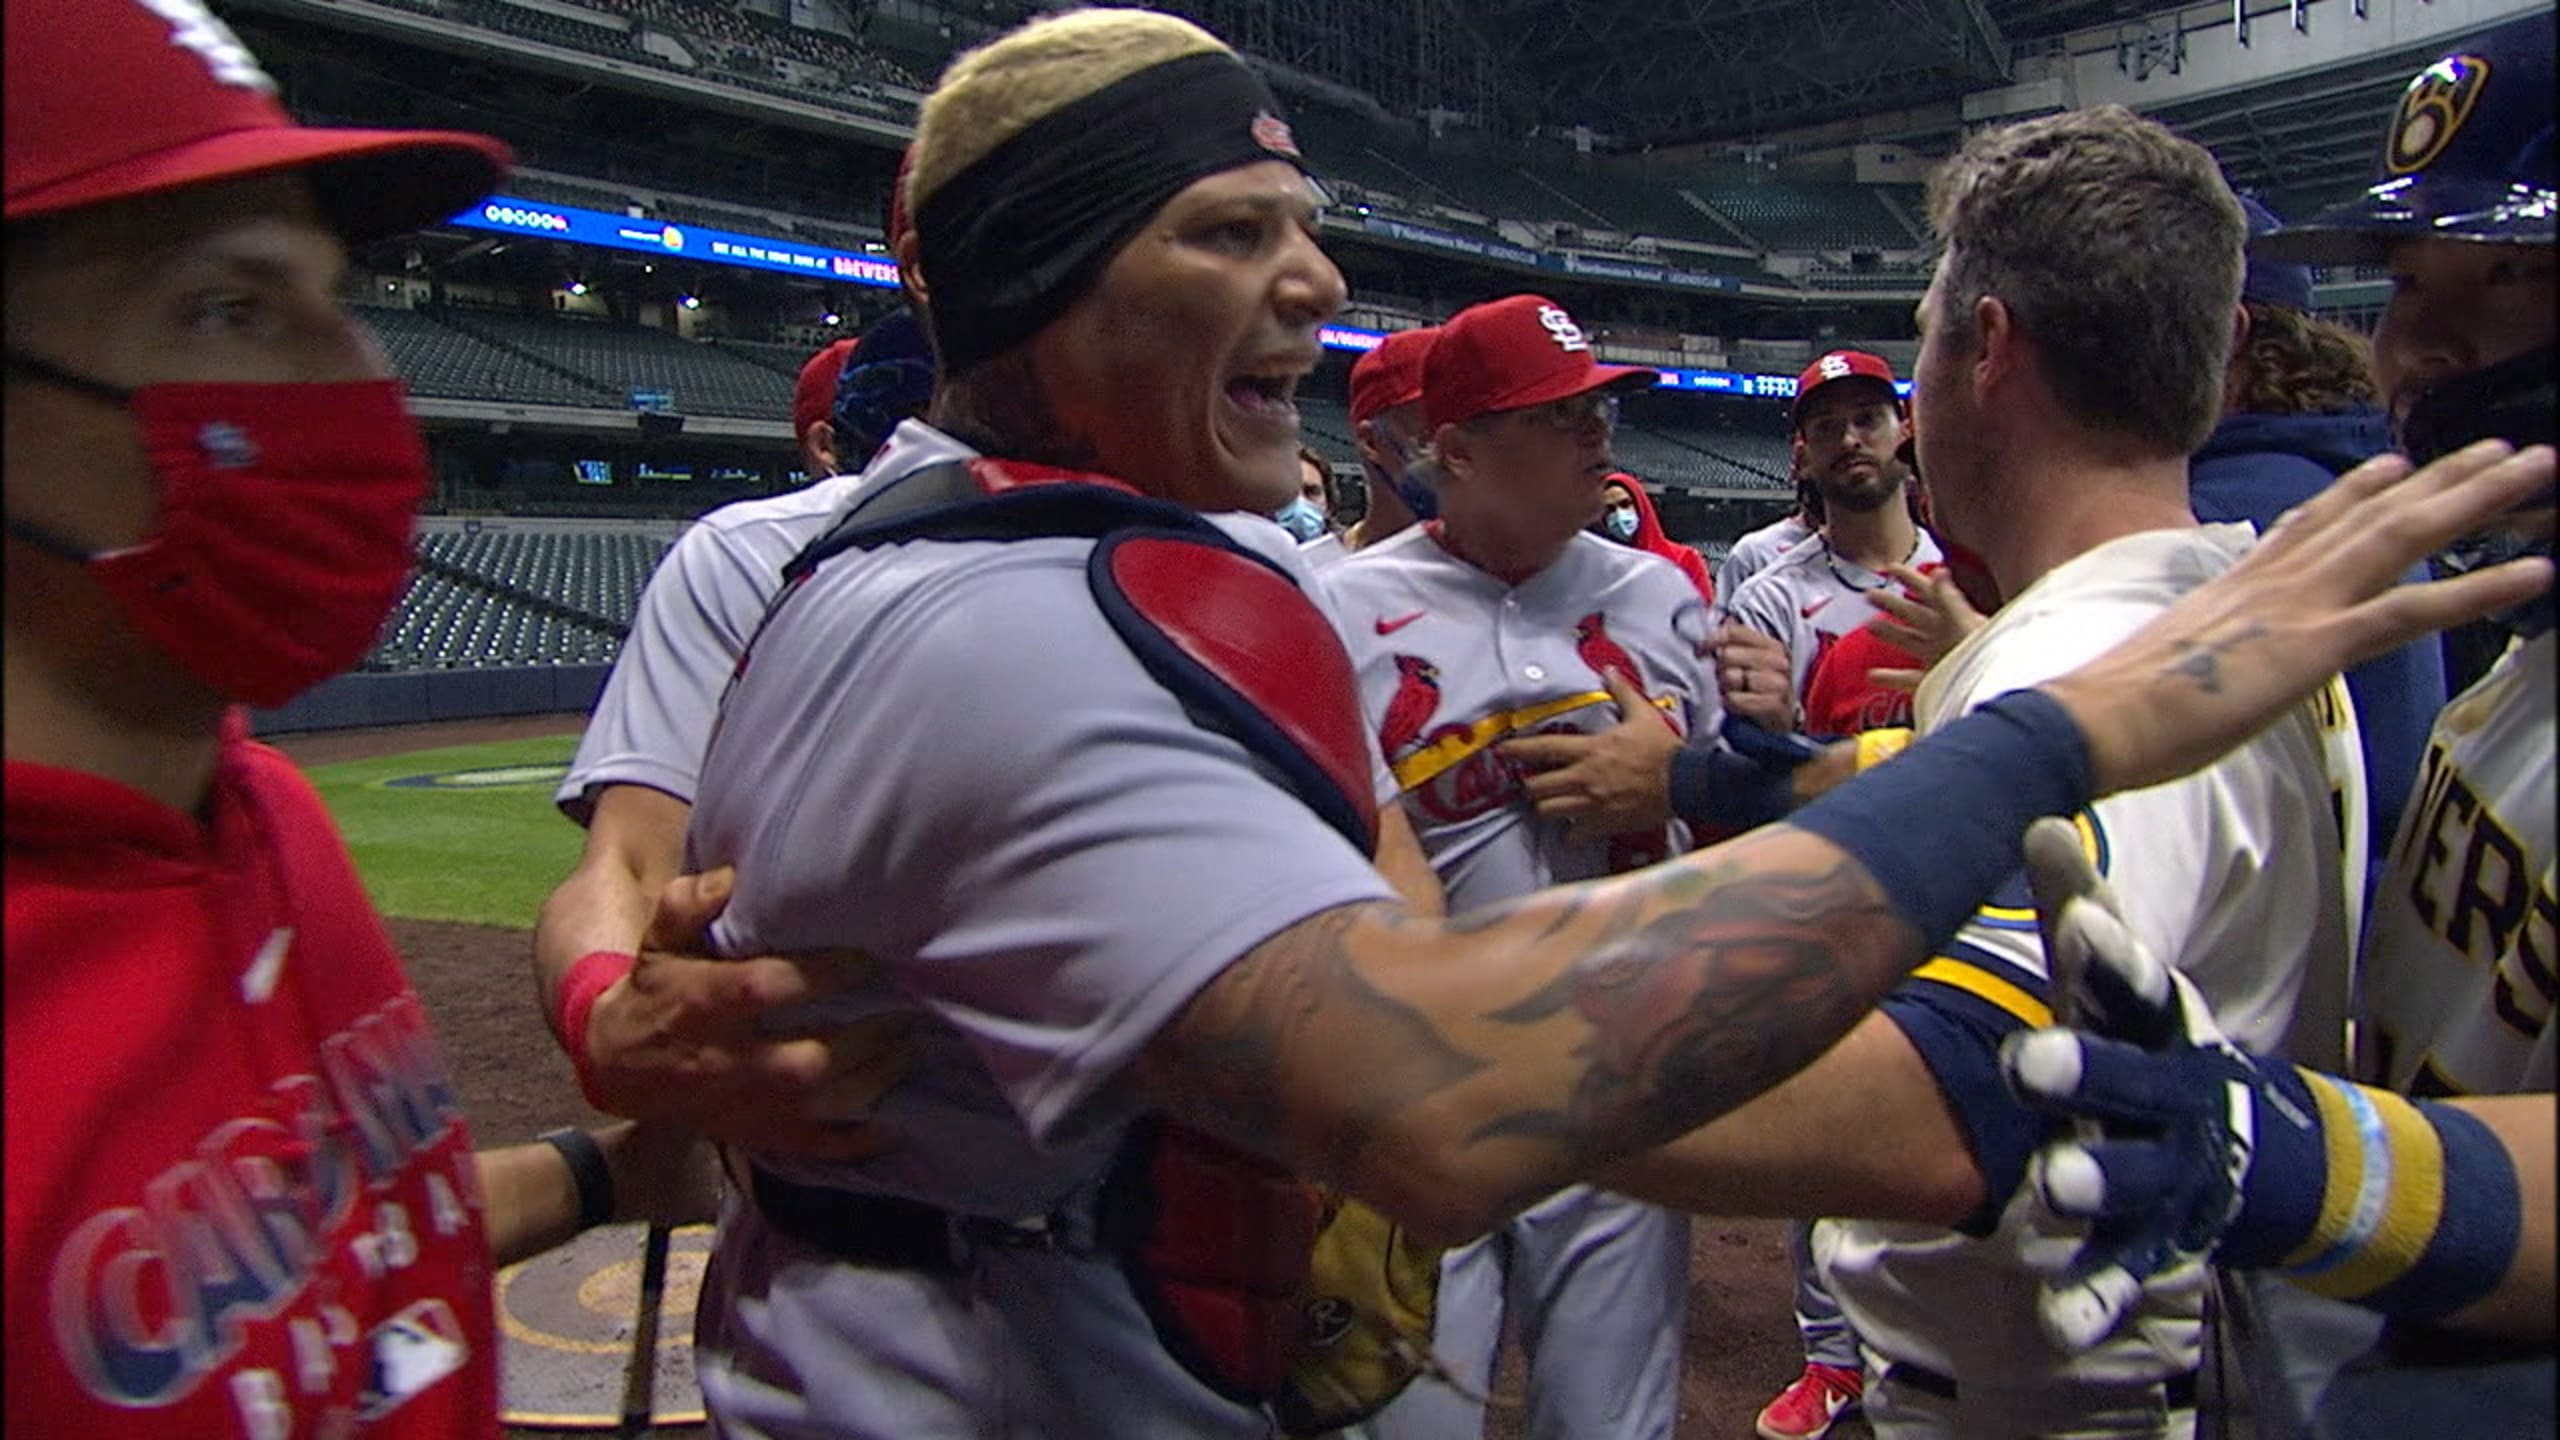 Brewers campaign against Cardinals' Yadier Molina